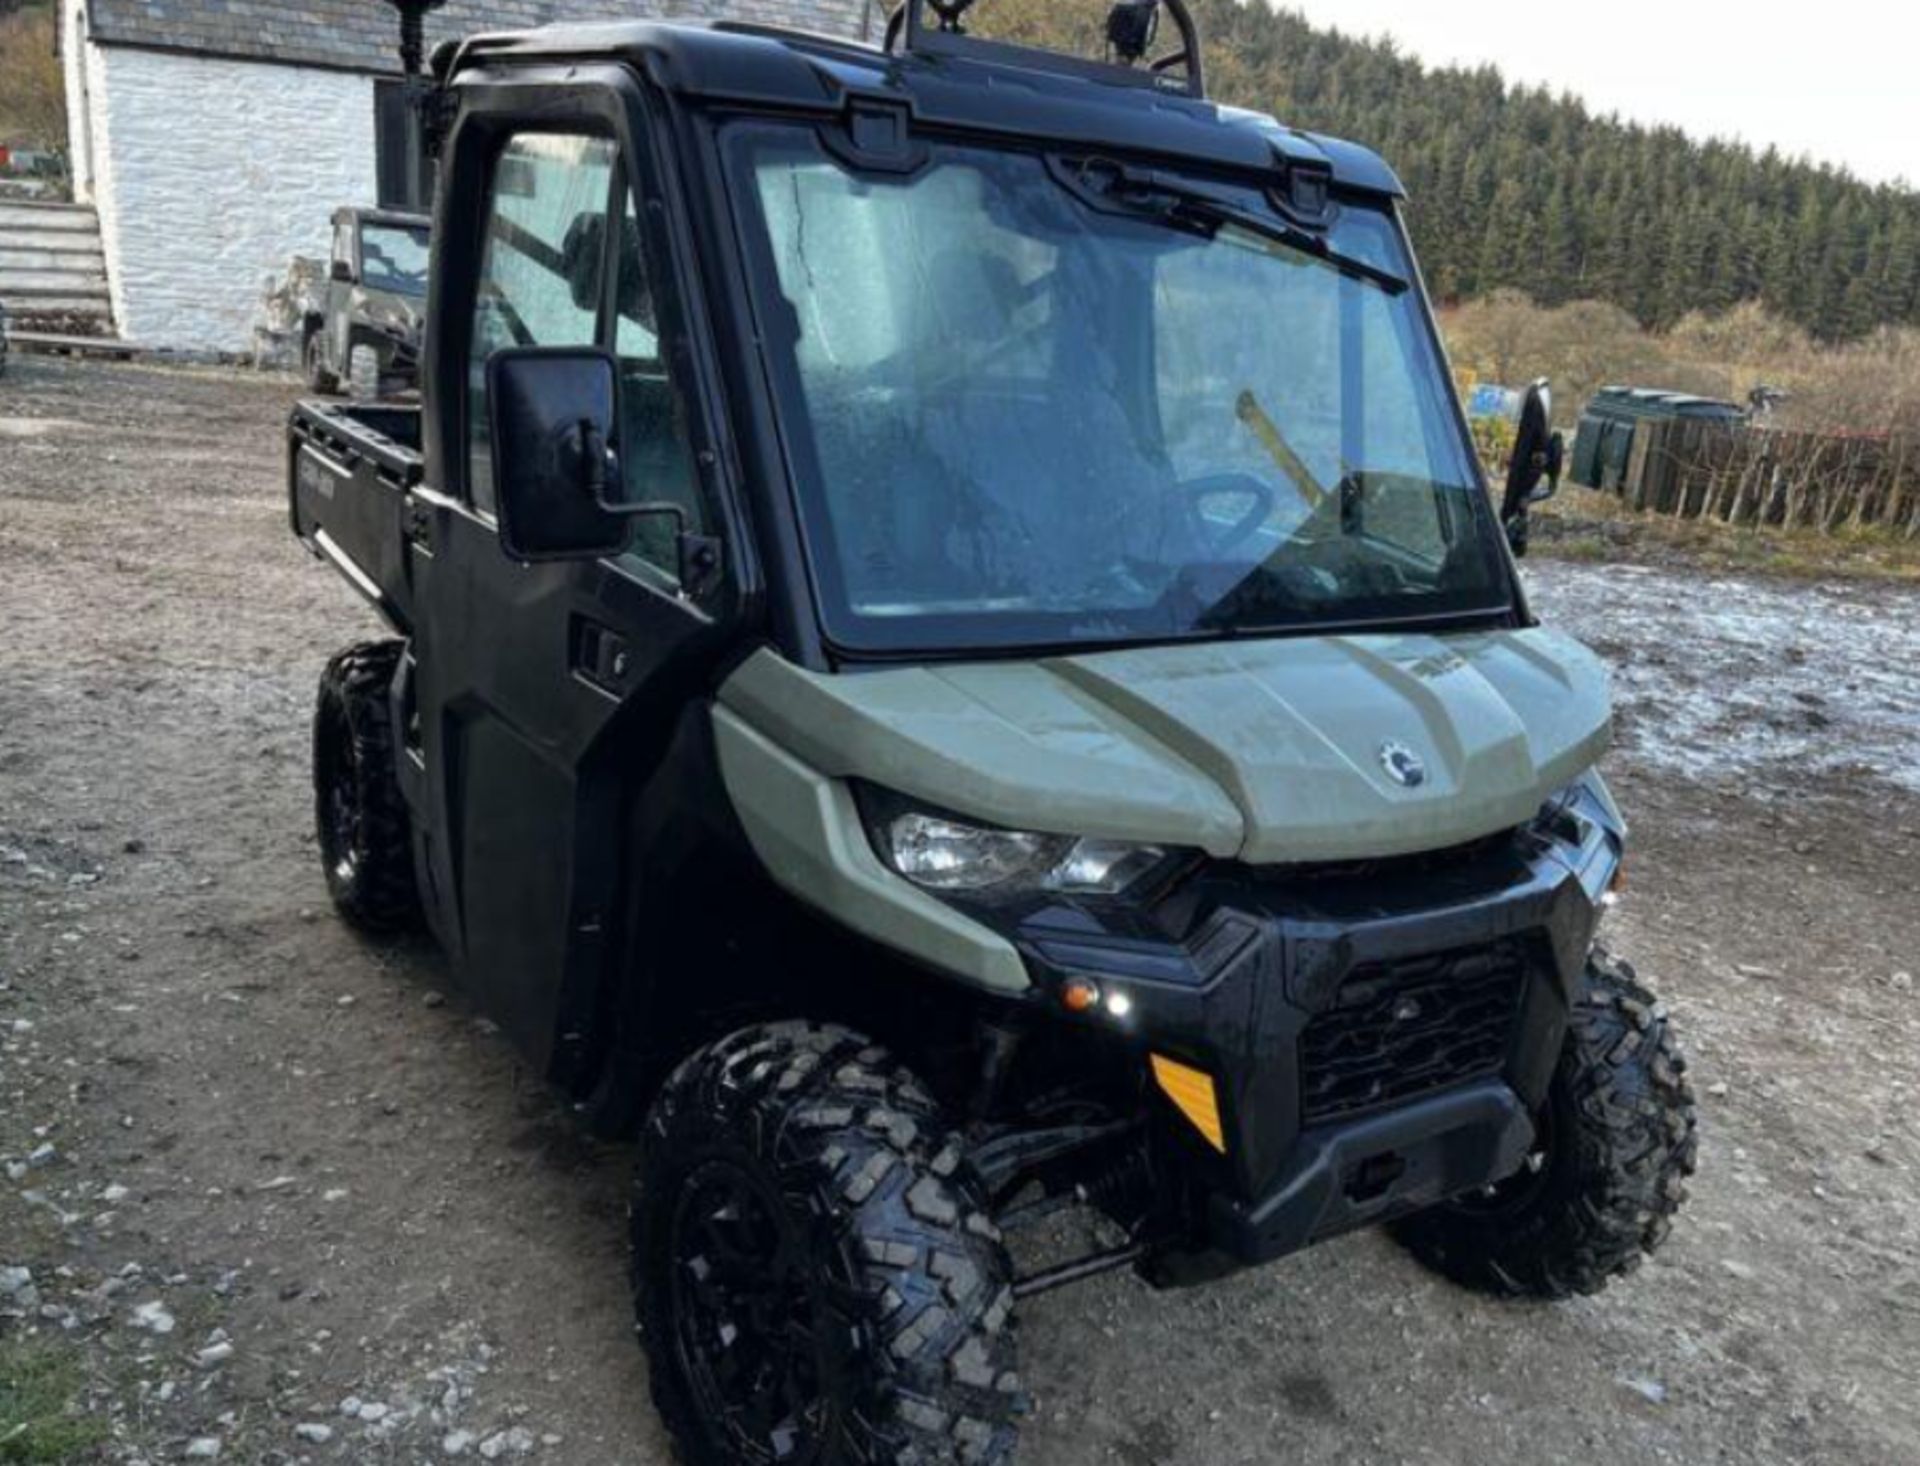 2019 CAN-AM TRAXTER HD8 PRO: THE ULTIMATE AGRICULTURAL UTV - Image 6 of 9